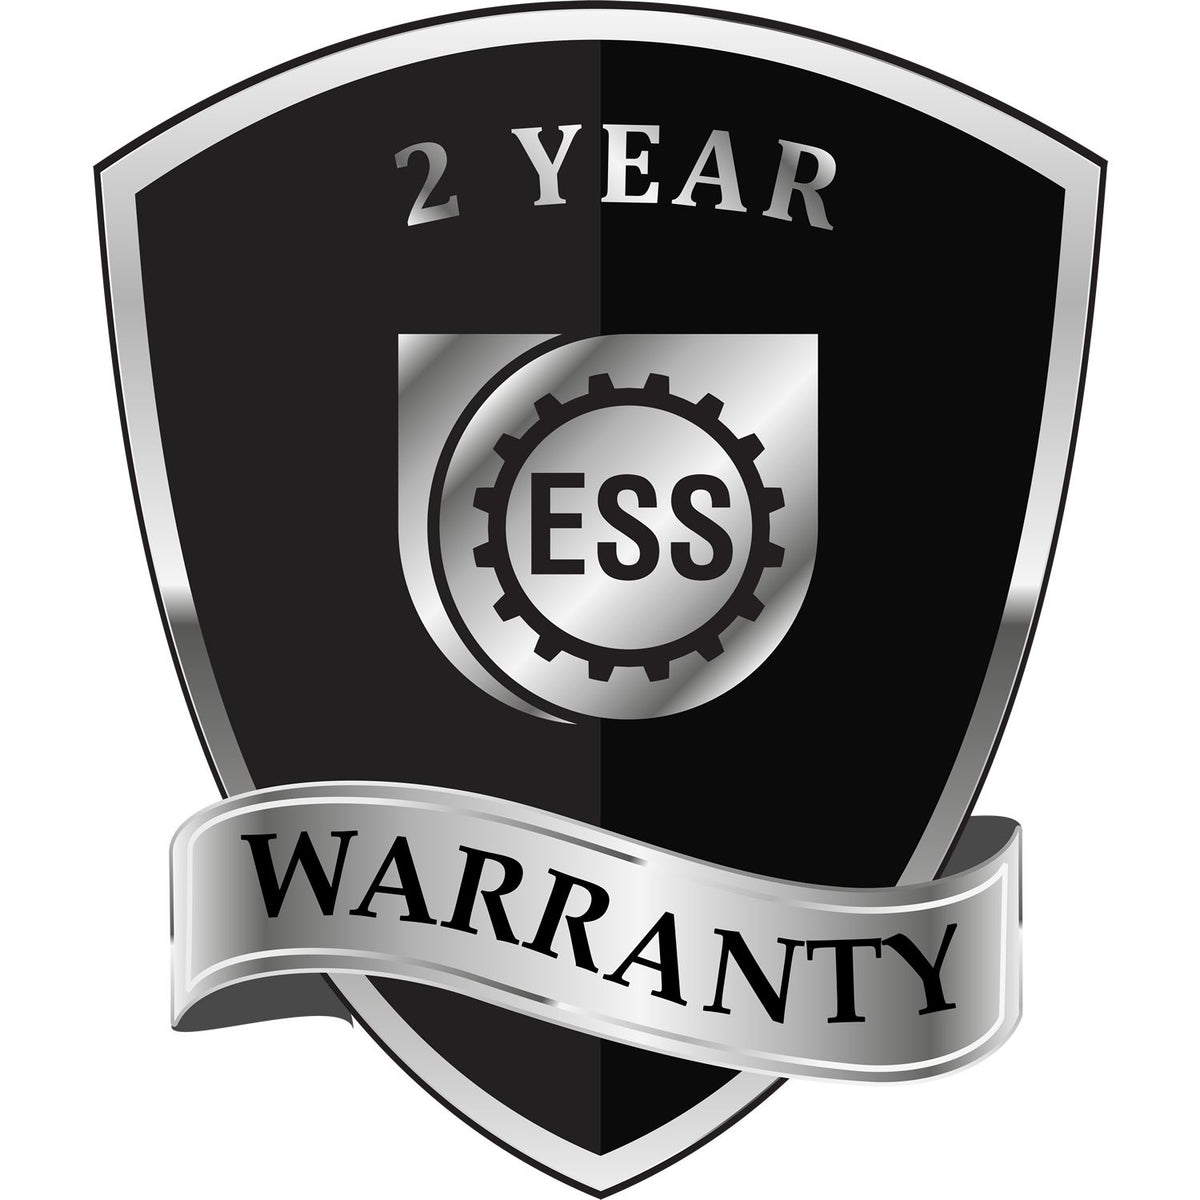 A badge or emblem showing a warranty icon for the Soft Pocket New Mexico Landscape Architect Embosser